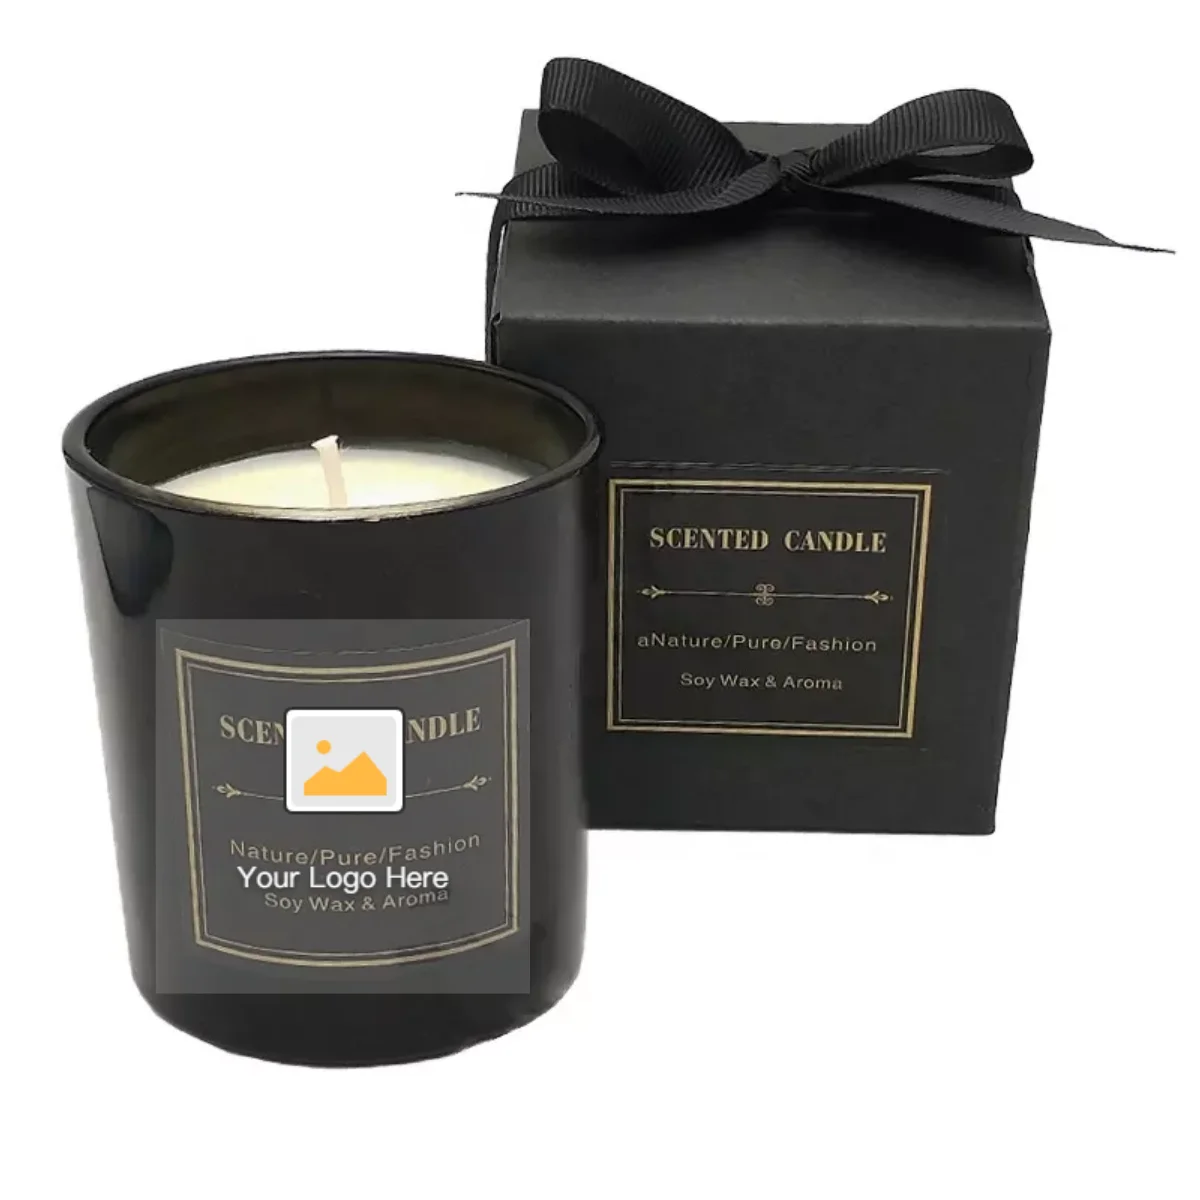 EXPRESS POST Aromatic and Organic Soy Candle 240g Tilley Australia Candles 